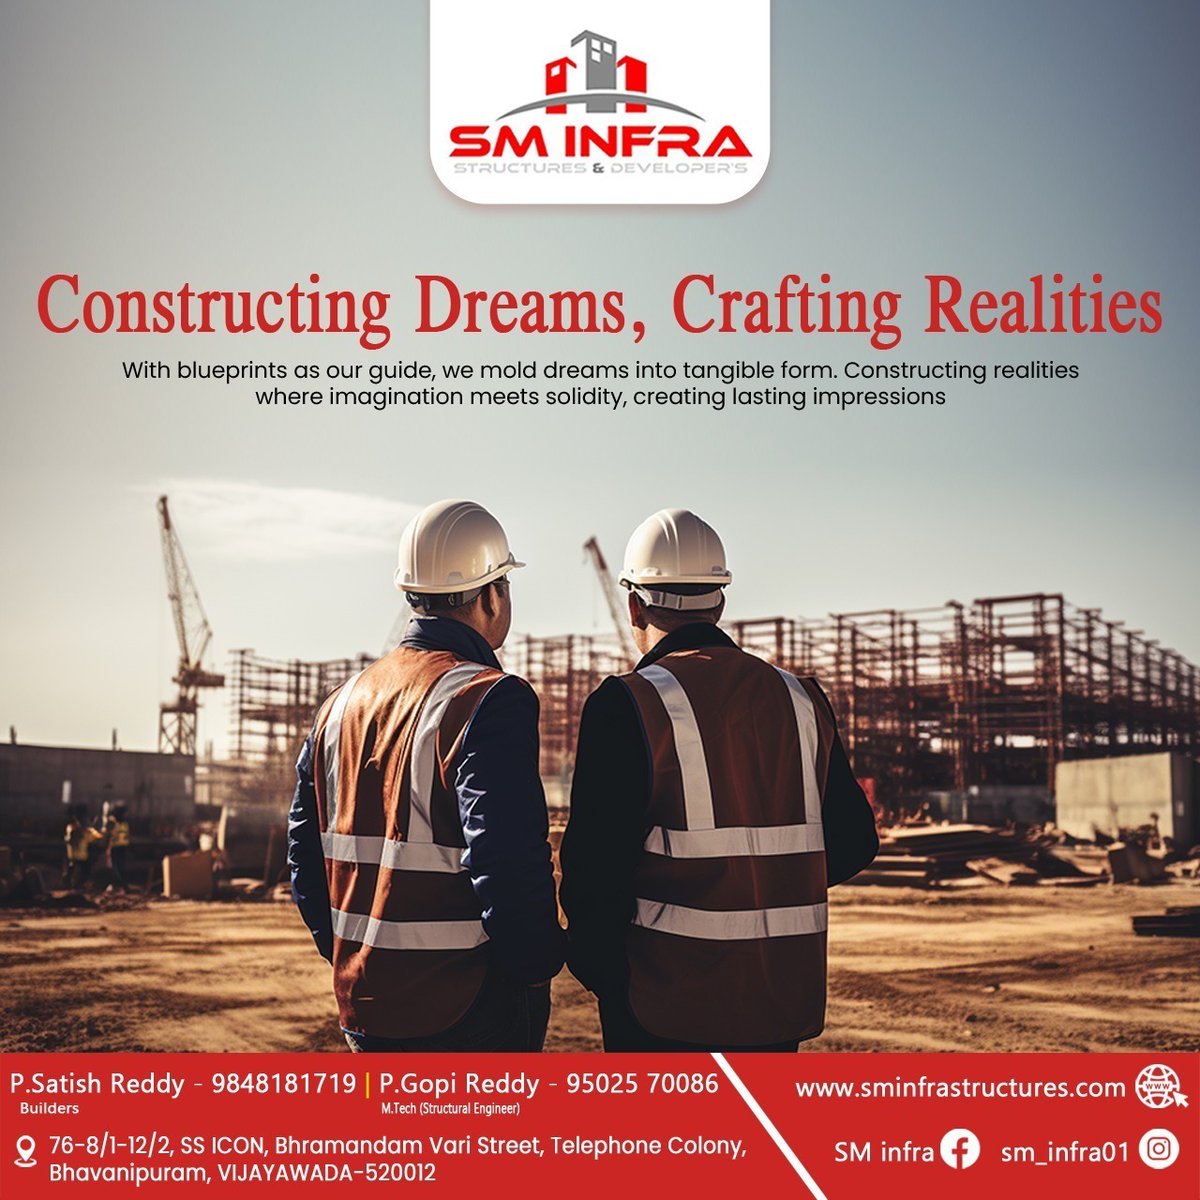 #sminfra #sminfraconst #dreamhome #homeplane #homedesigns #home #sweethome #homeconstruction #vijayawada #vijayawadaconstruction #buildtoendure #built #infrastructures #3darchitectureplans #structuraldesign #interiordesigns #perfecthome #homeconstructioncompany